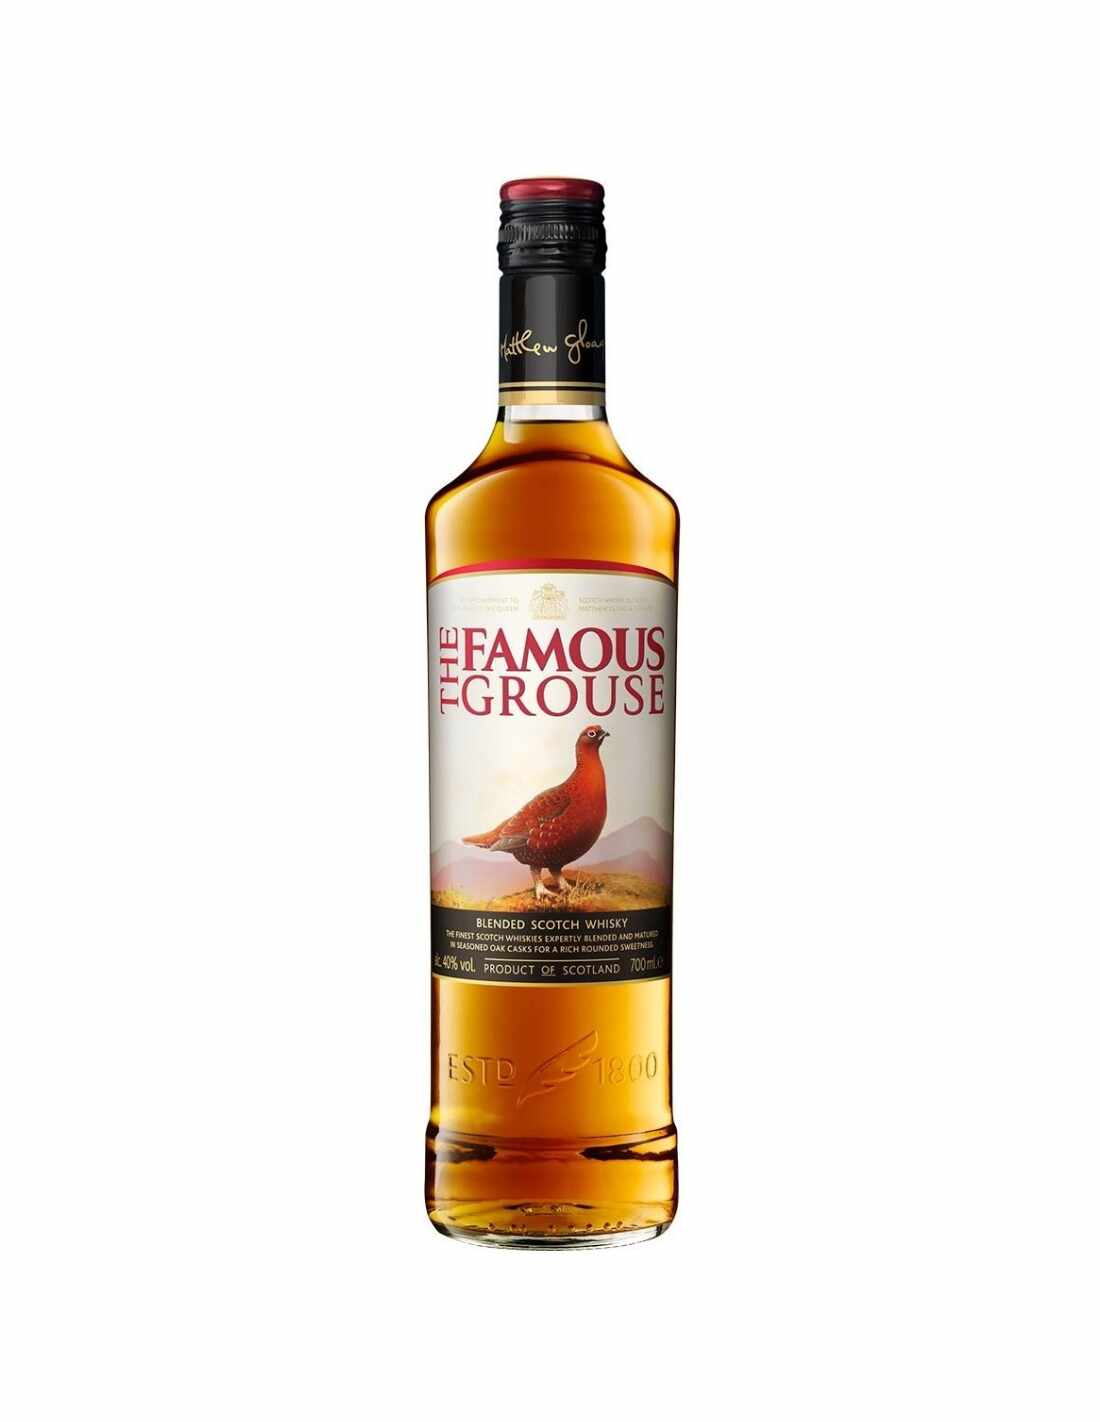 Whisky The Famous Grouse, 0.7L, 40% alc., Scotia